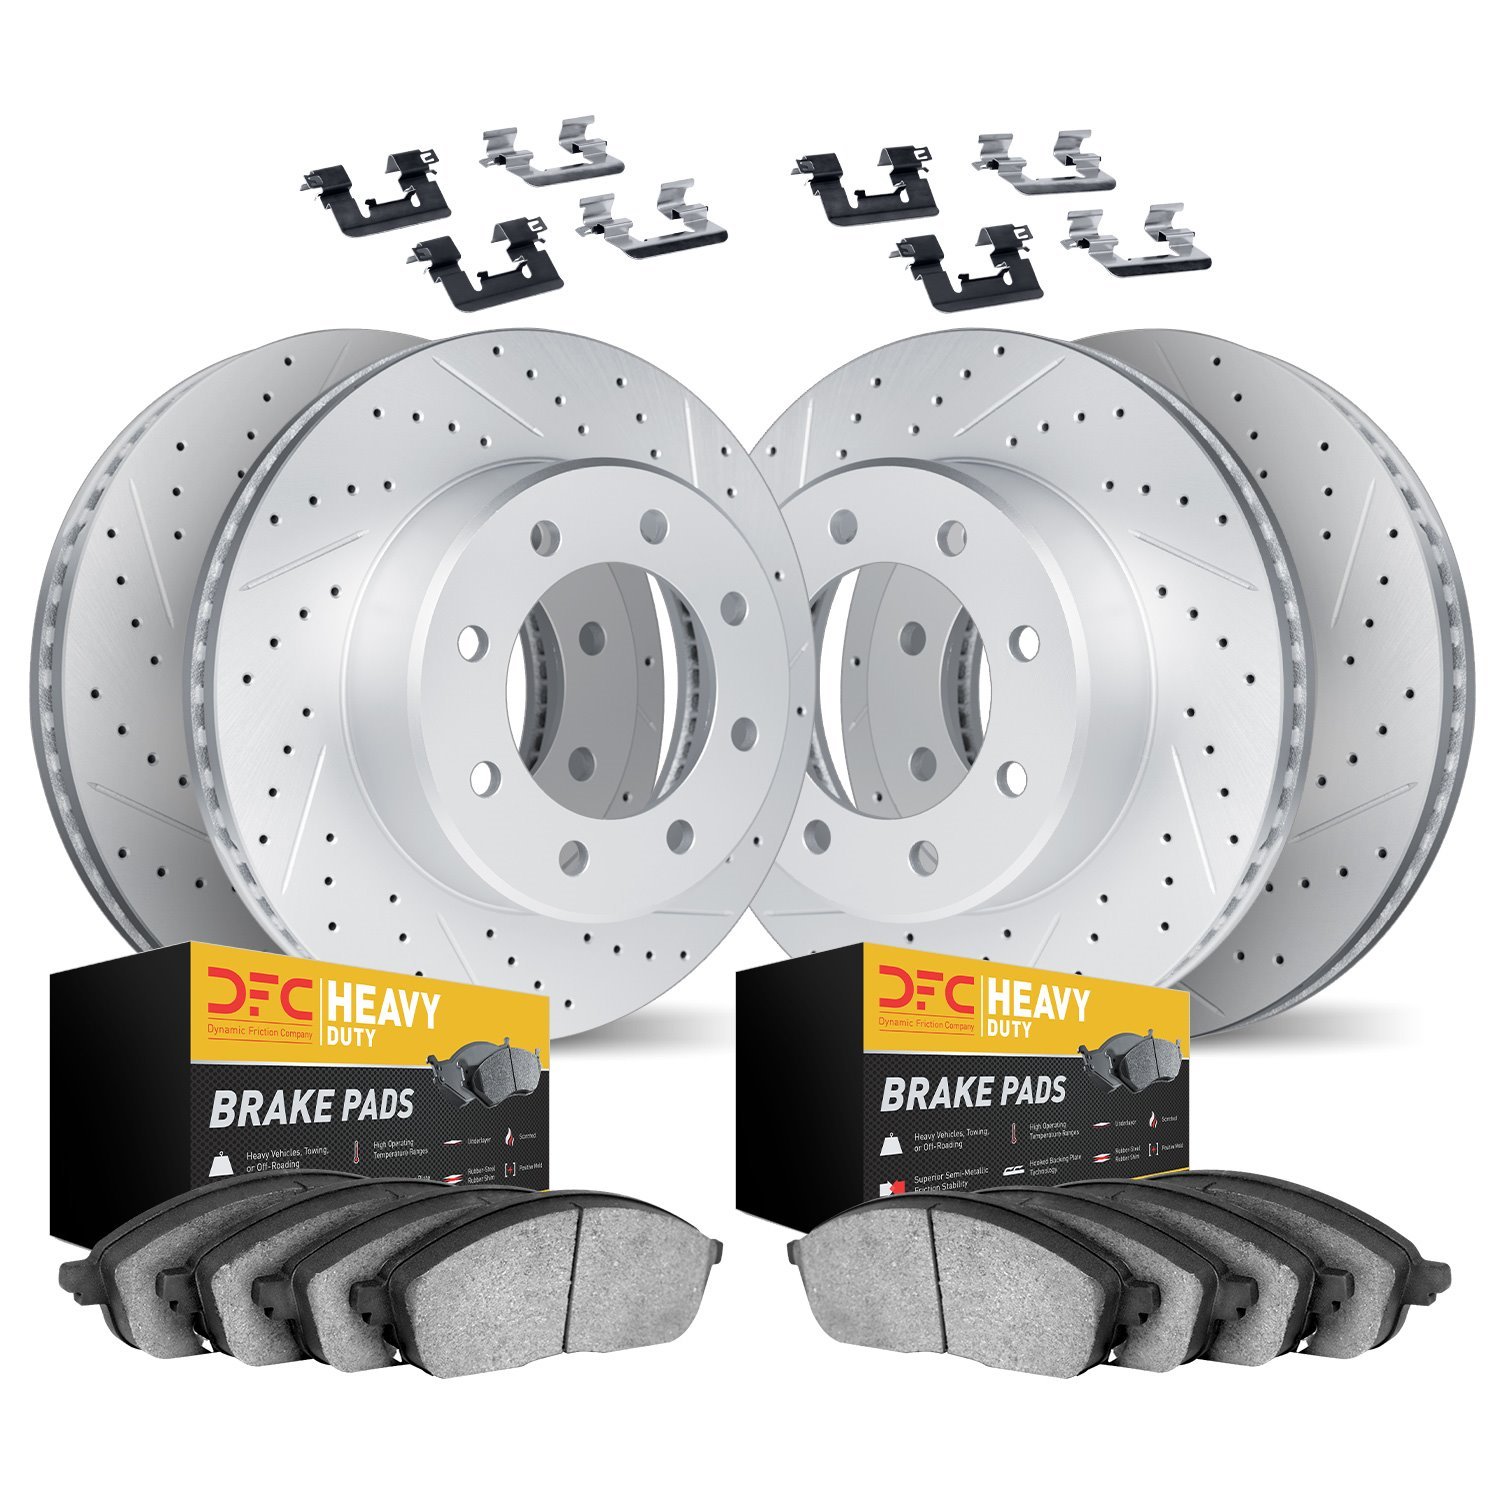 2214-99084 Geoperformance Drilled/Slotted Rotors w/Heavy-Duty Pads Kit & Hardware, 2006-2010 Ford/Lincoln/Mercury/Mazda, Positio